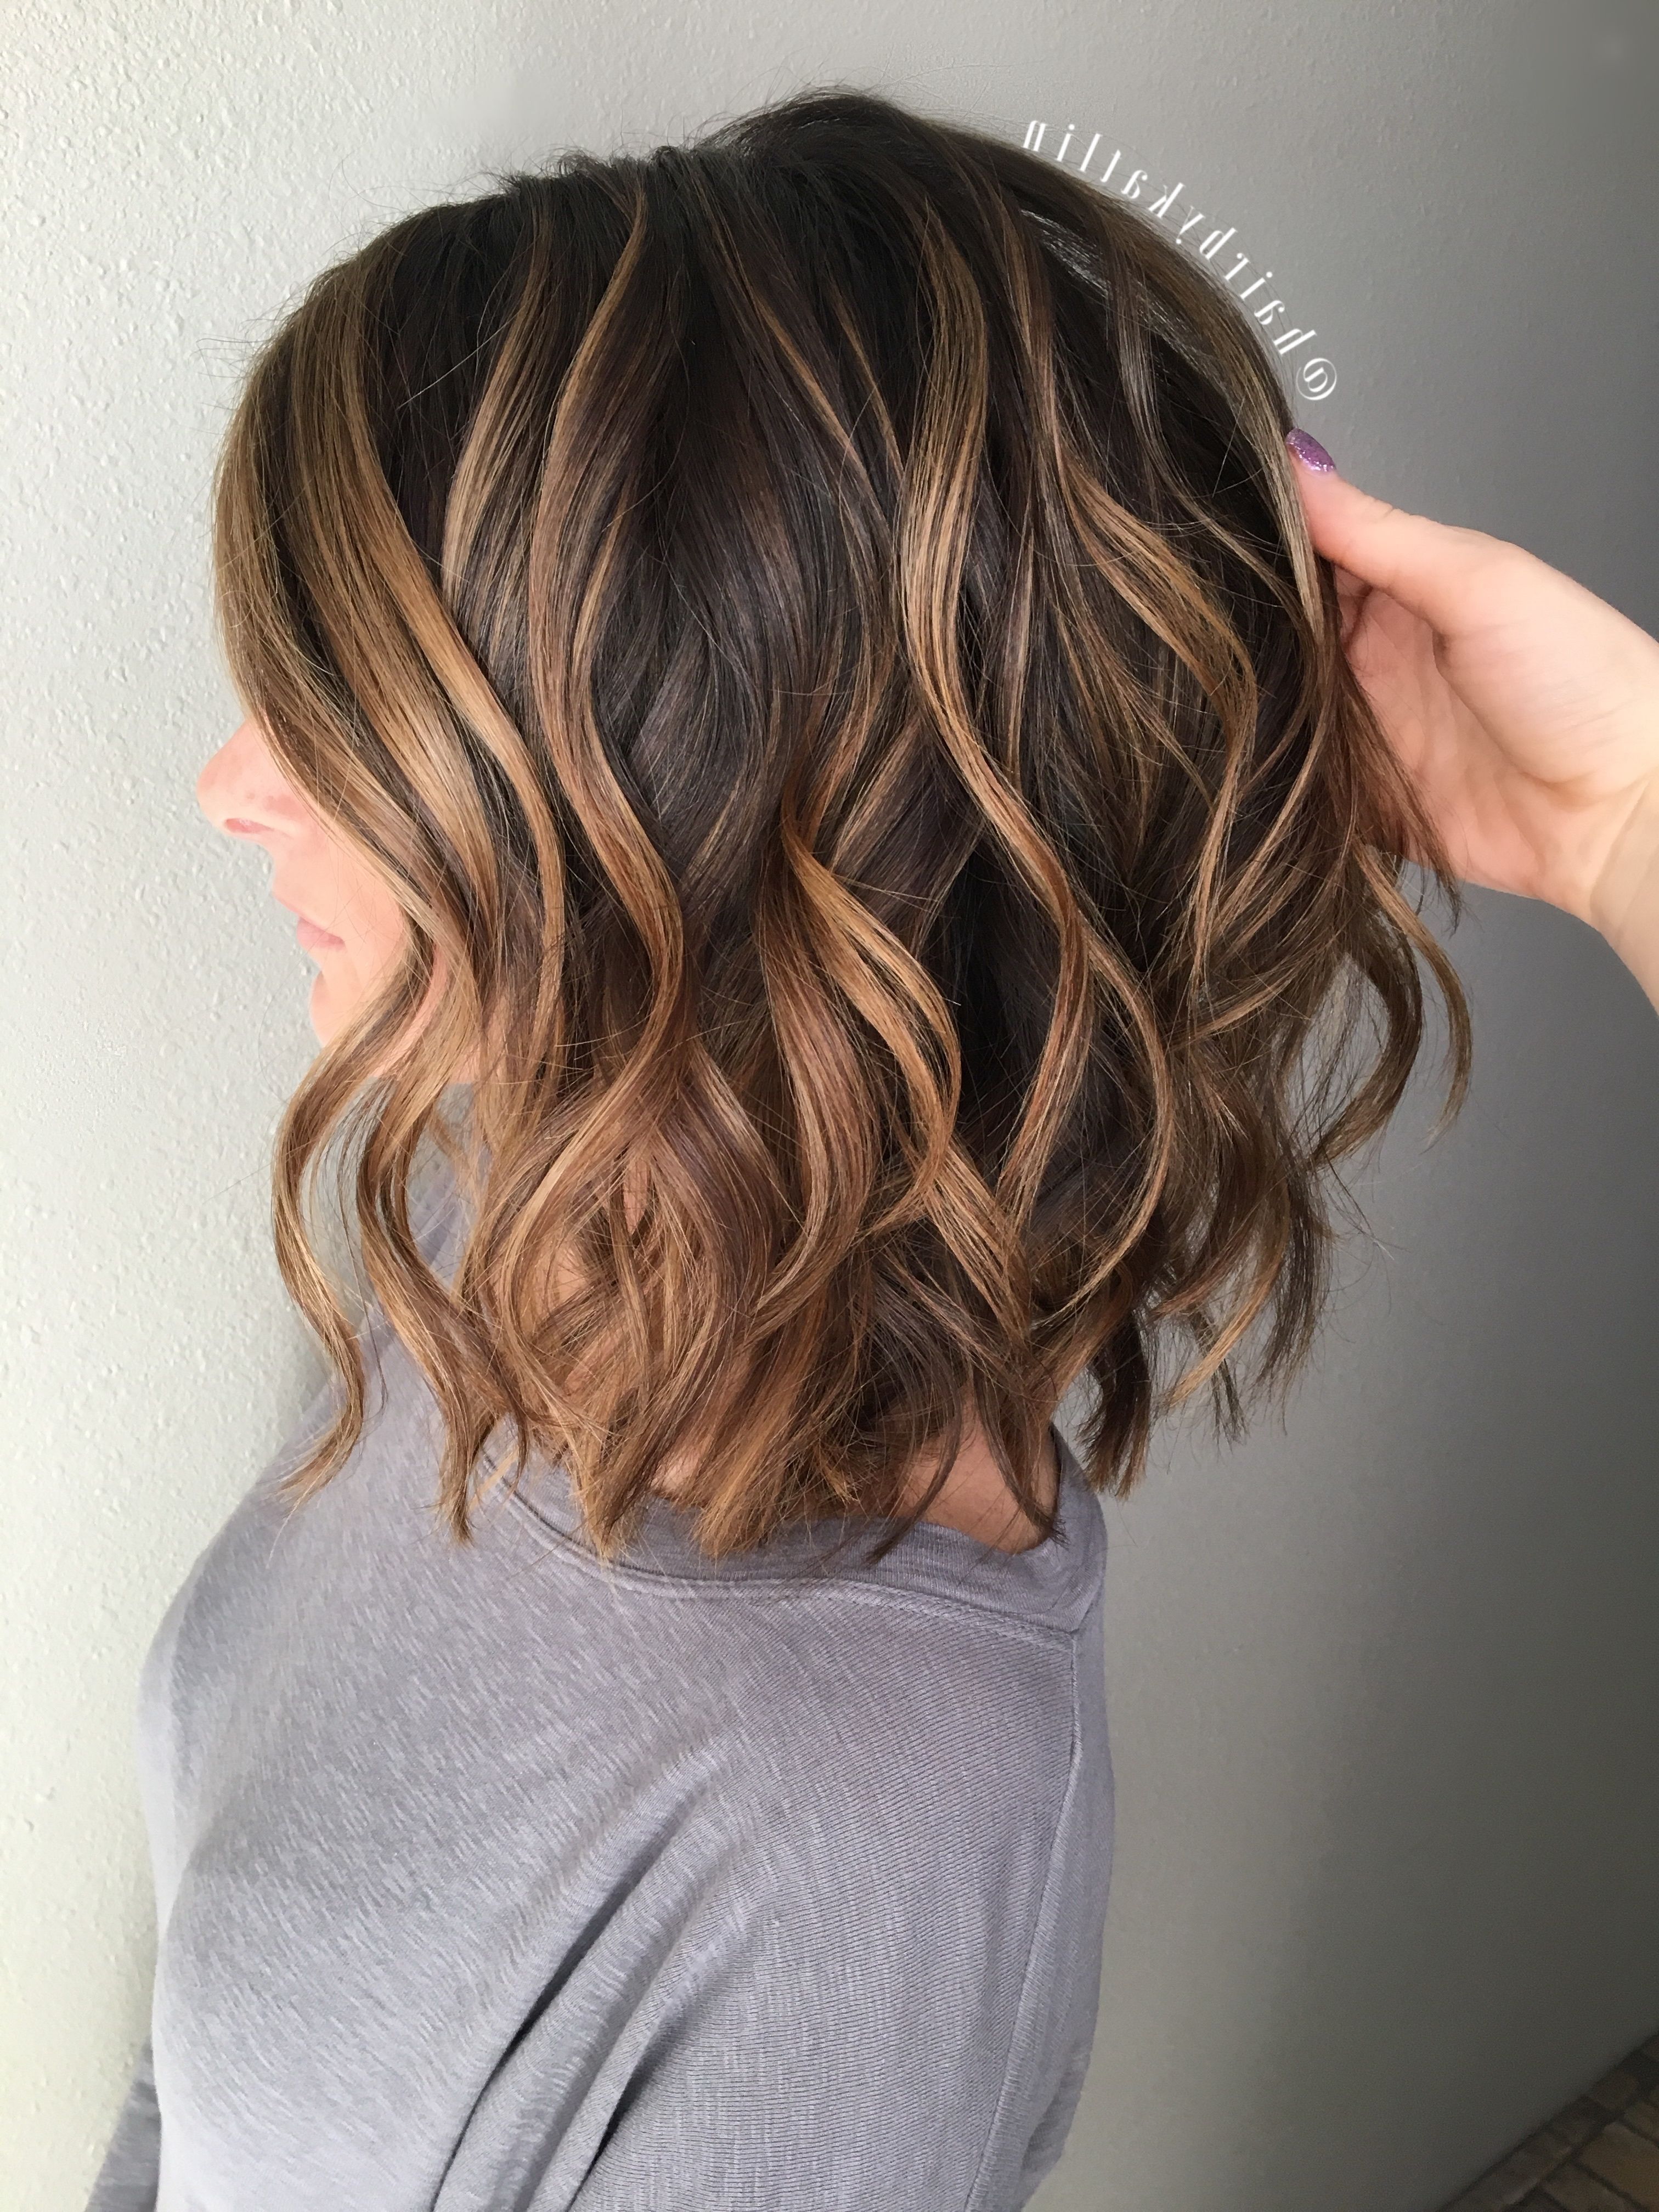 Balayage Brunette Caramel Highlights Honey Balayeombre | Short Hair In Recent Feathered Pixie Haircuts With Balayage Highlights (View 9 of 15)